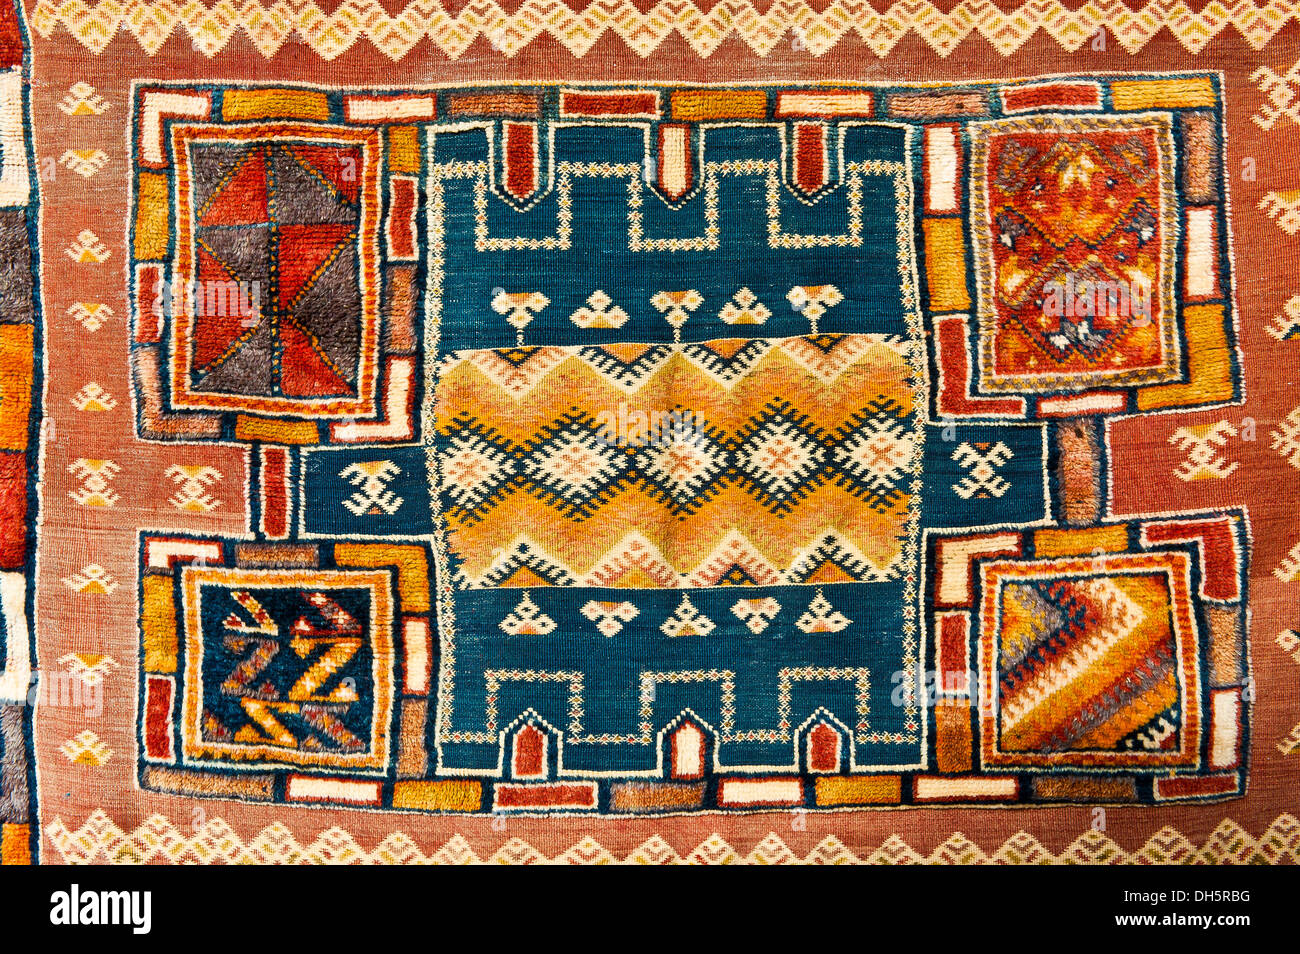 Woven, knotted and embroidered Glaoui carpet or rug, detail view, Marrakech, Morocco, Africa Stock Photo